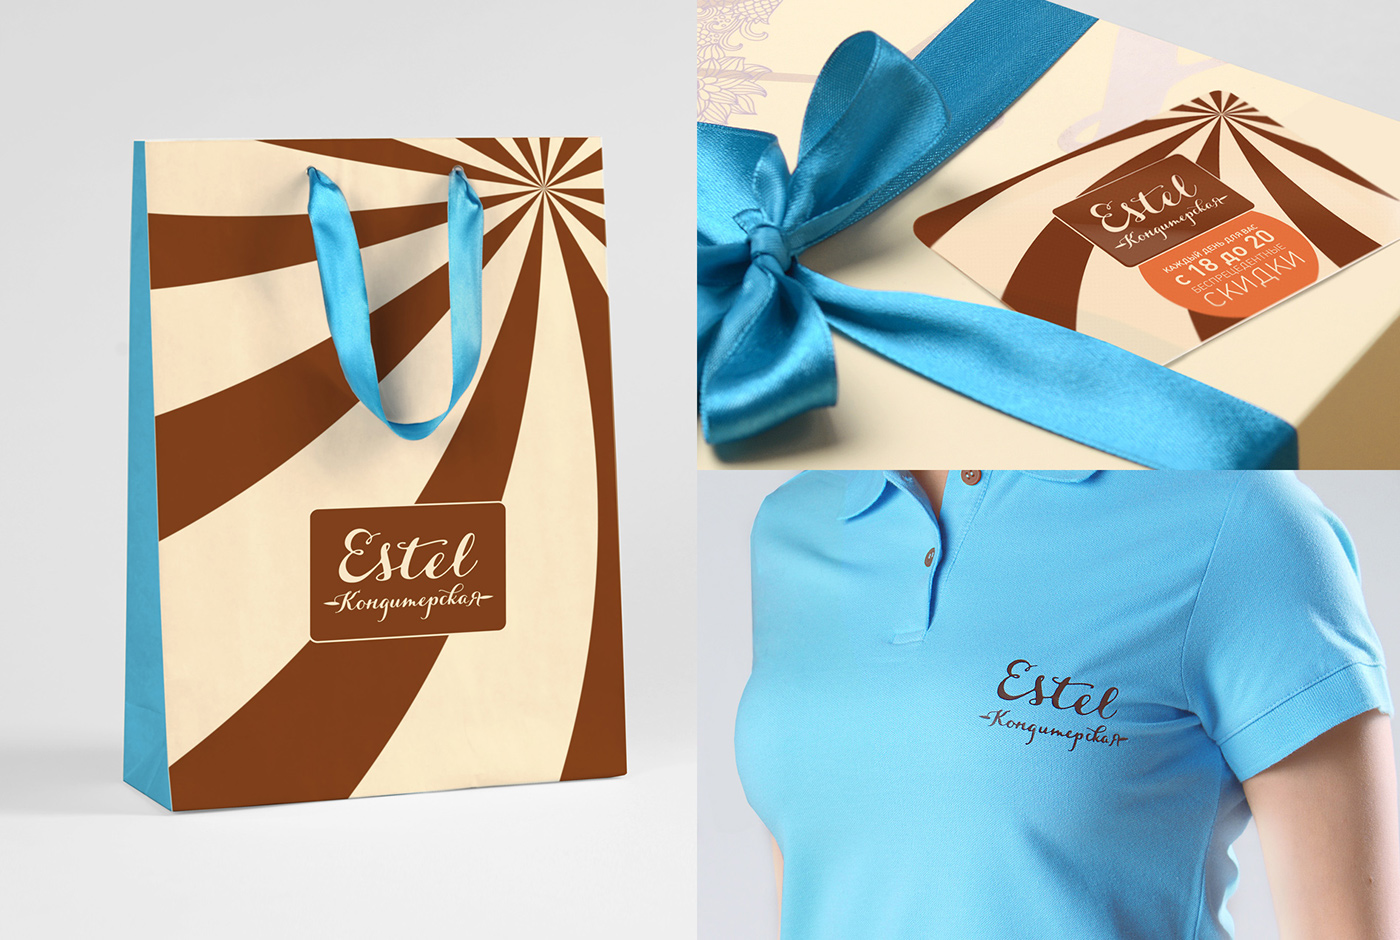 Confectionery delicious cakes pastries desserts Corporate Identity